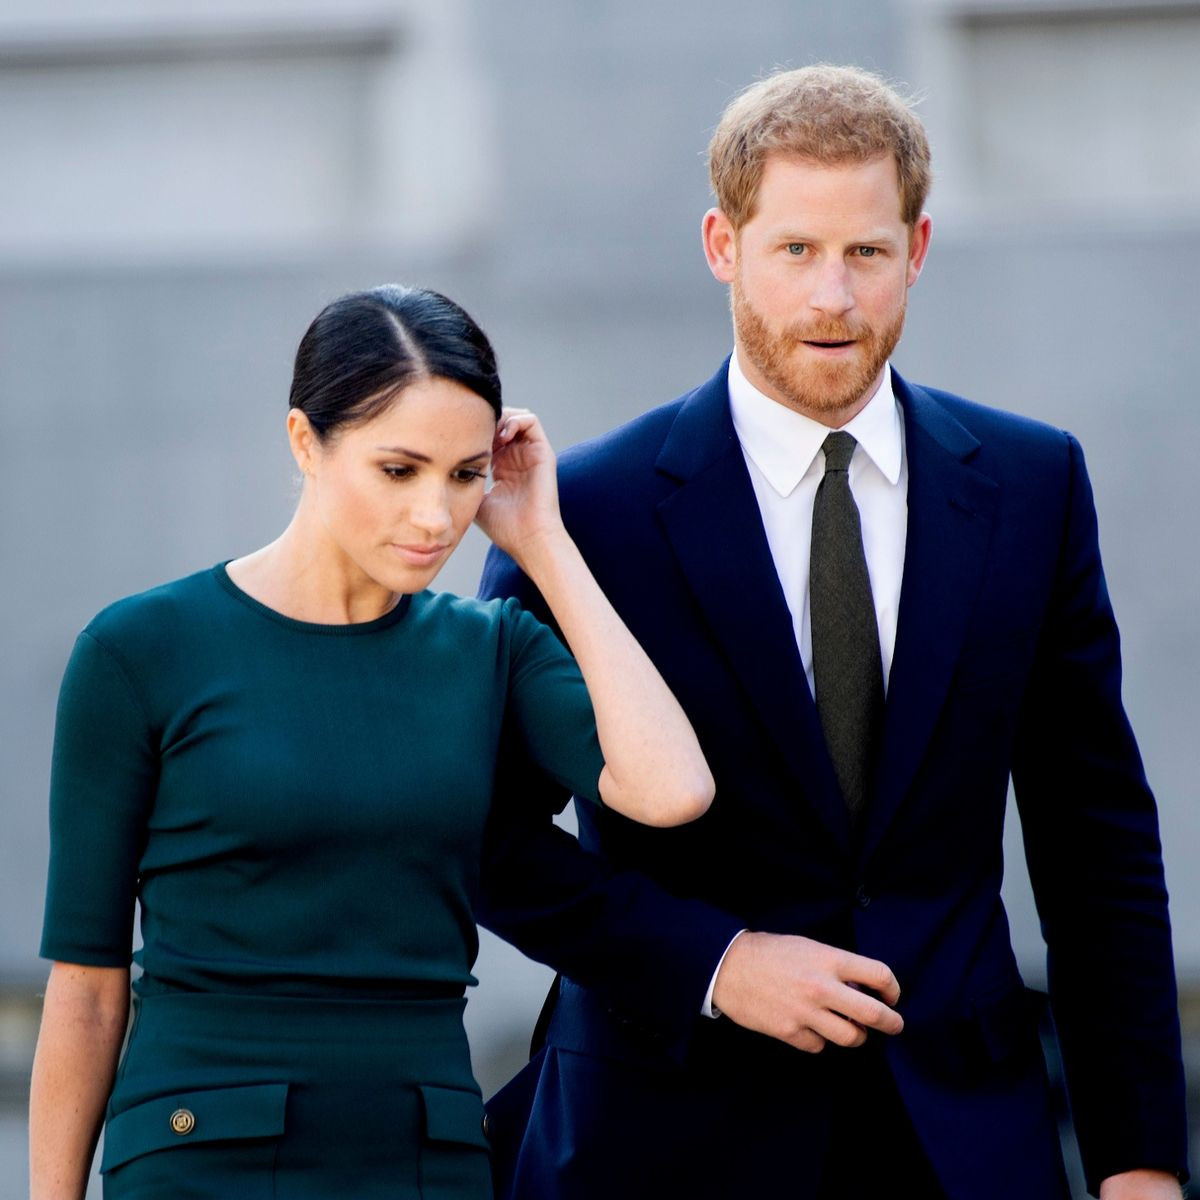 Meghan Markle reveals she suffered devastating miscarriage months ago while carrying son Archie in her arms